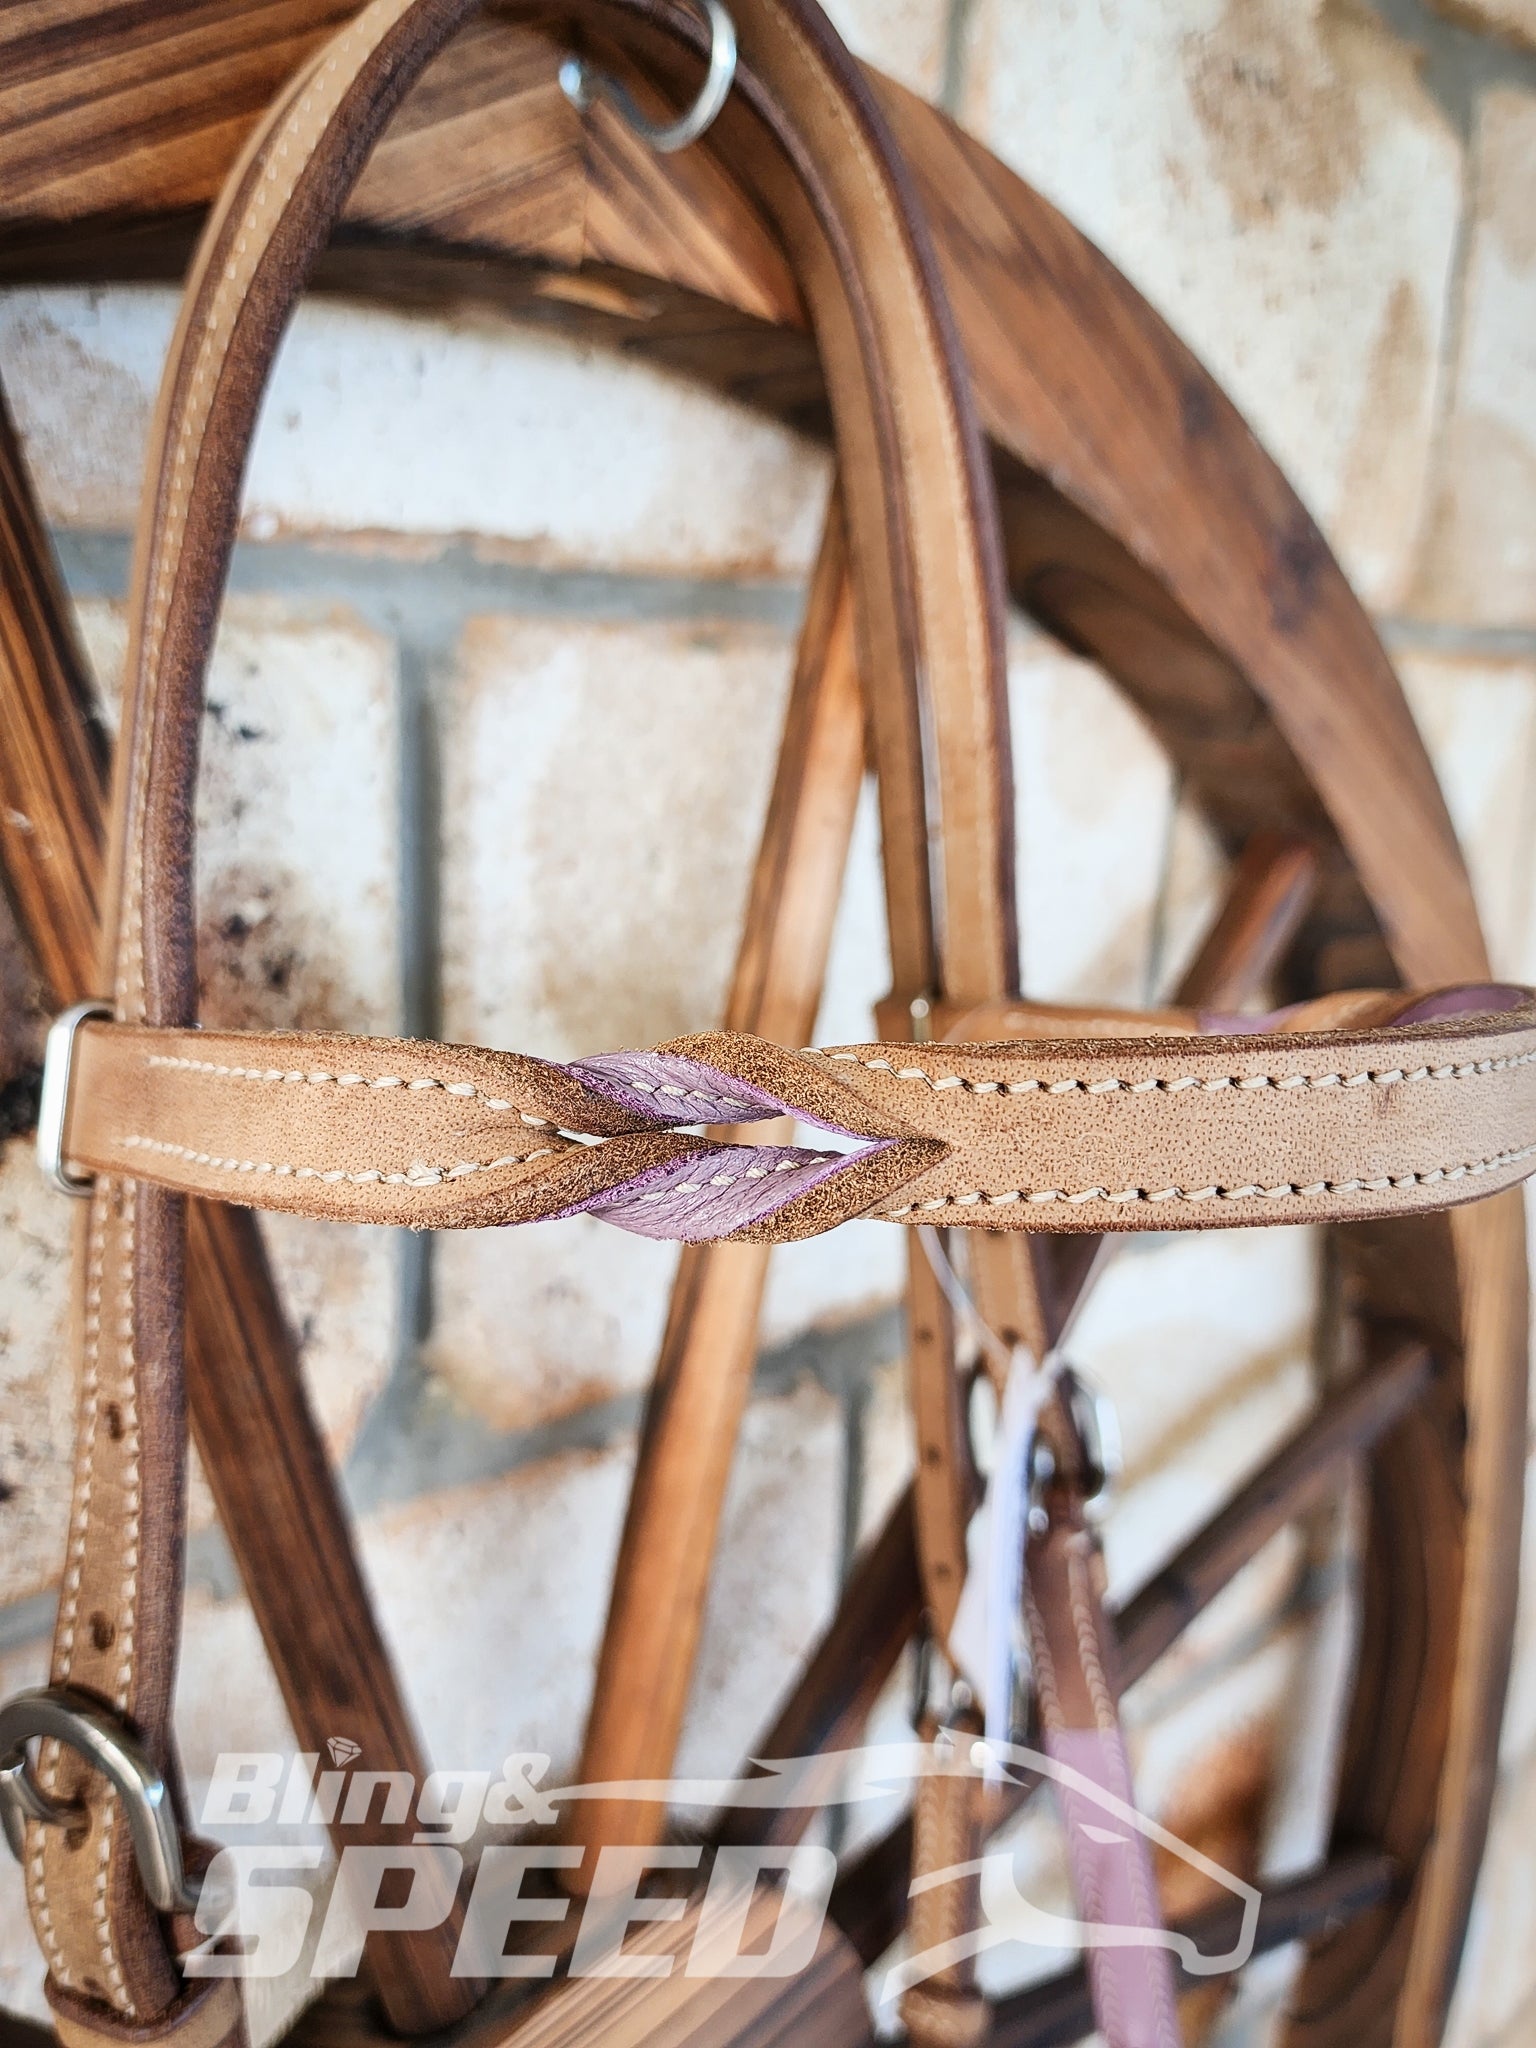 Bling & Speed Purple Twisted Bloodknot Bridle with matching Barrel Reins (7987701481710)